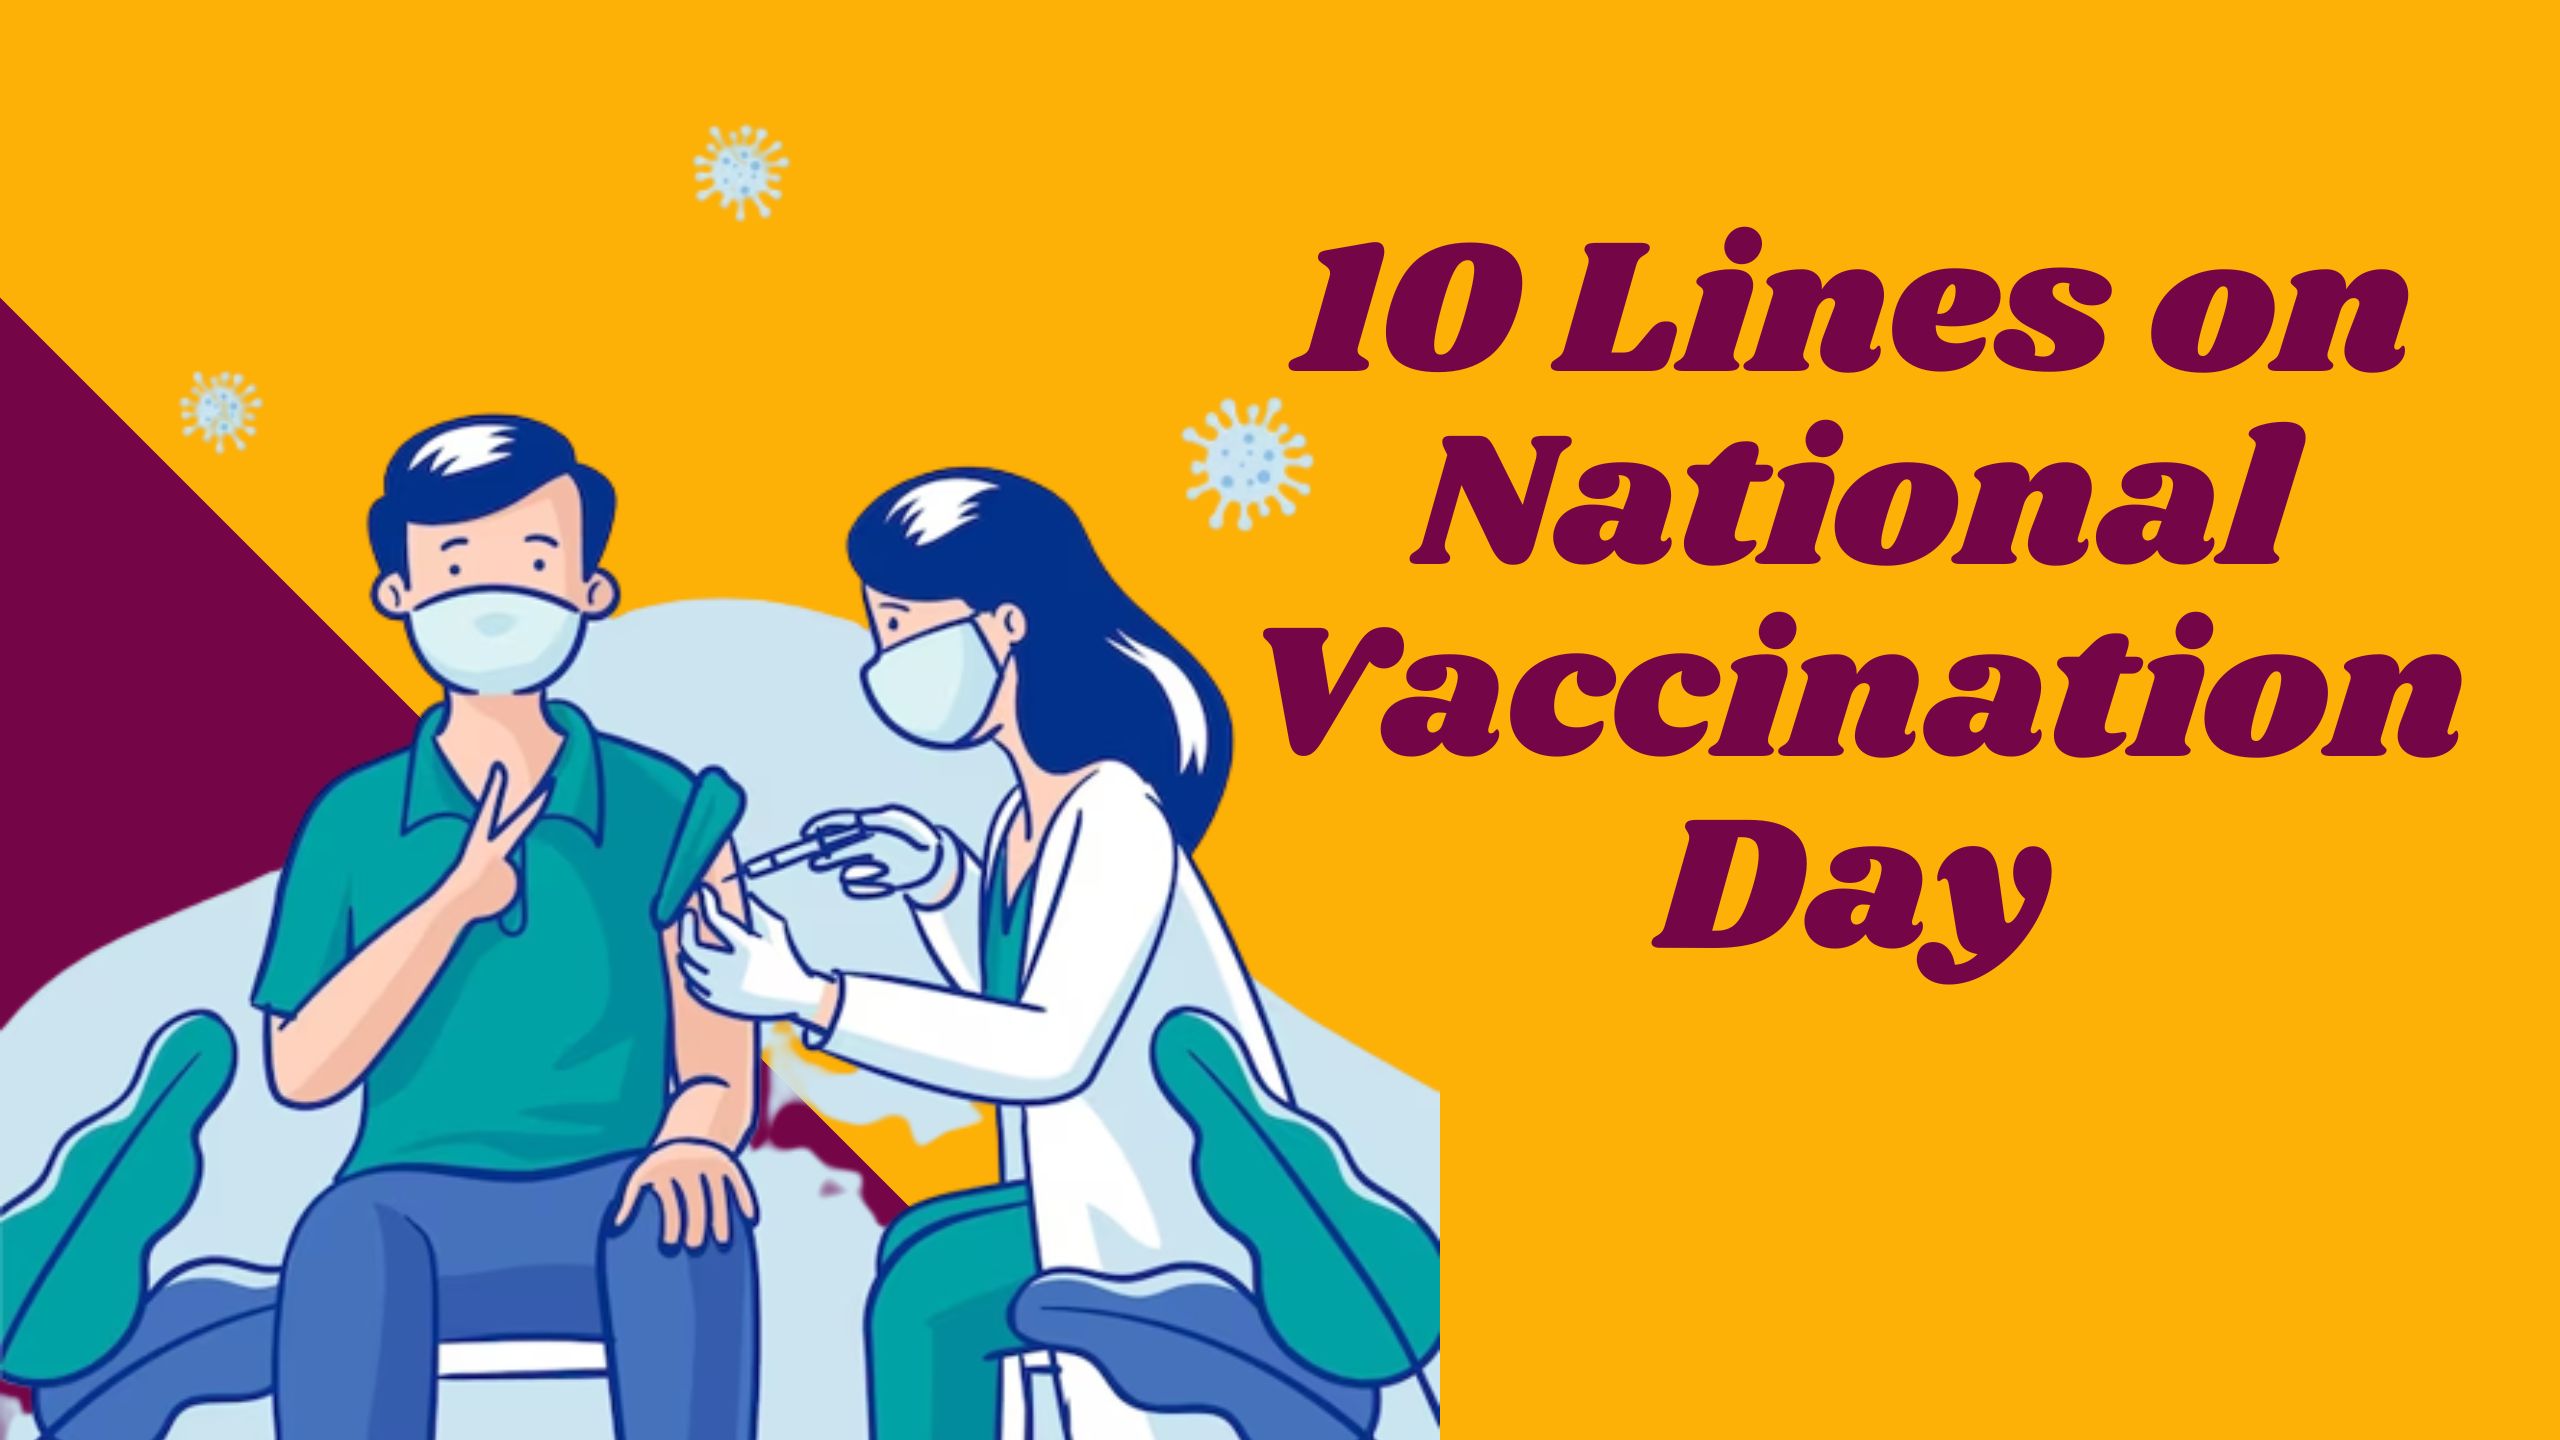 10 Lines on National Vaccination Day